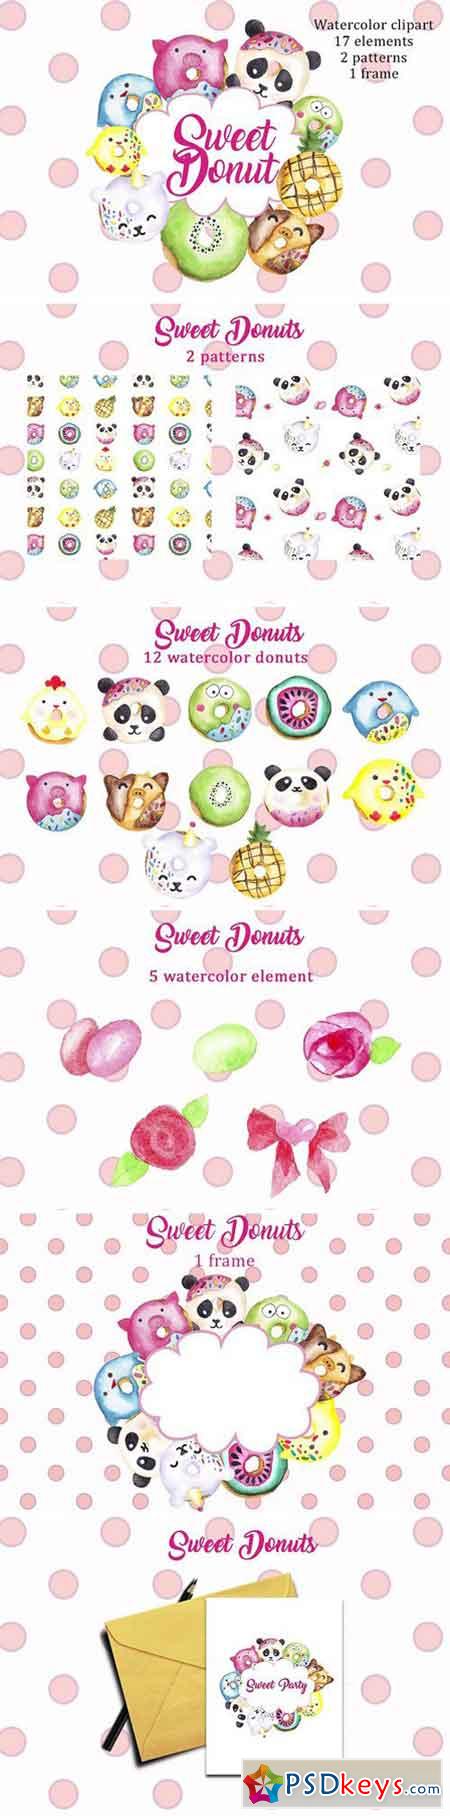 Sweet donuts 2458925